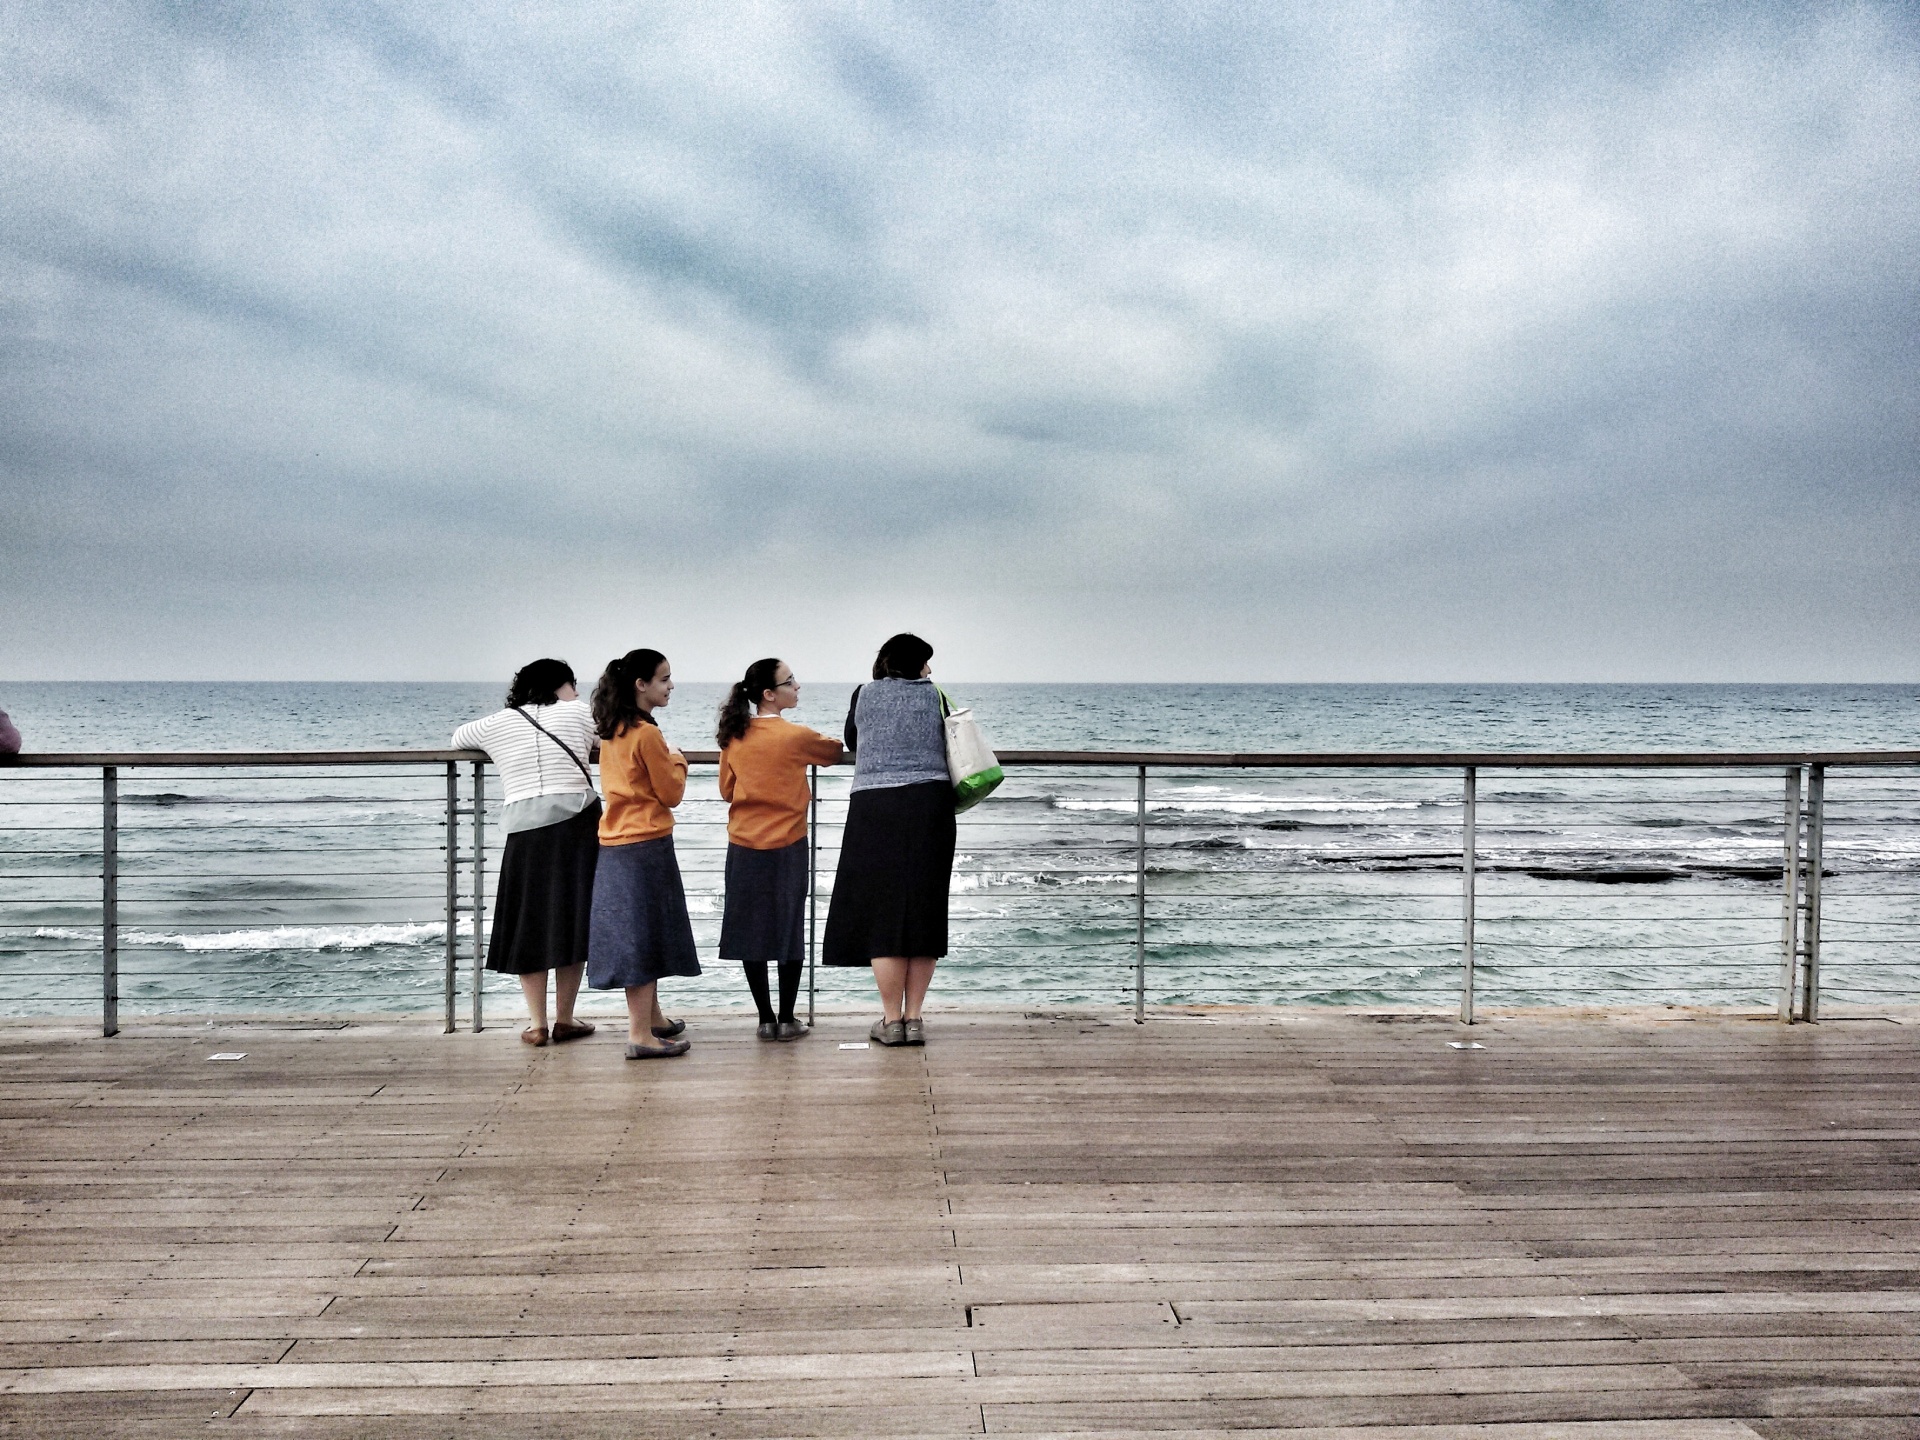 Girls at the seaside under a dark and cloudy sky